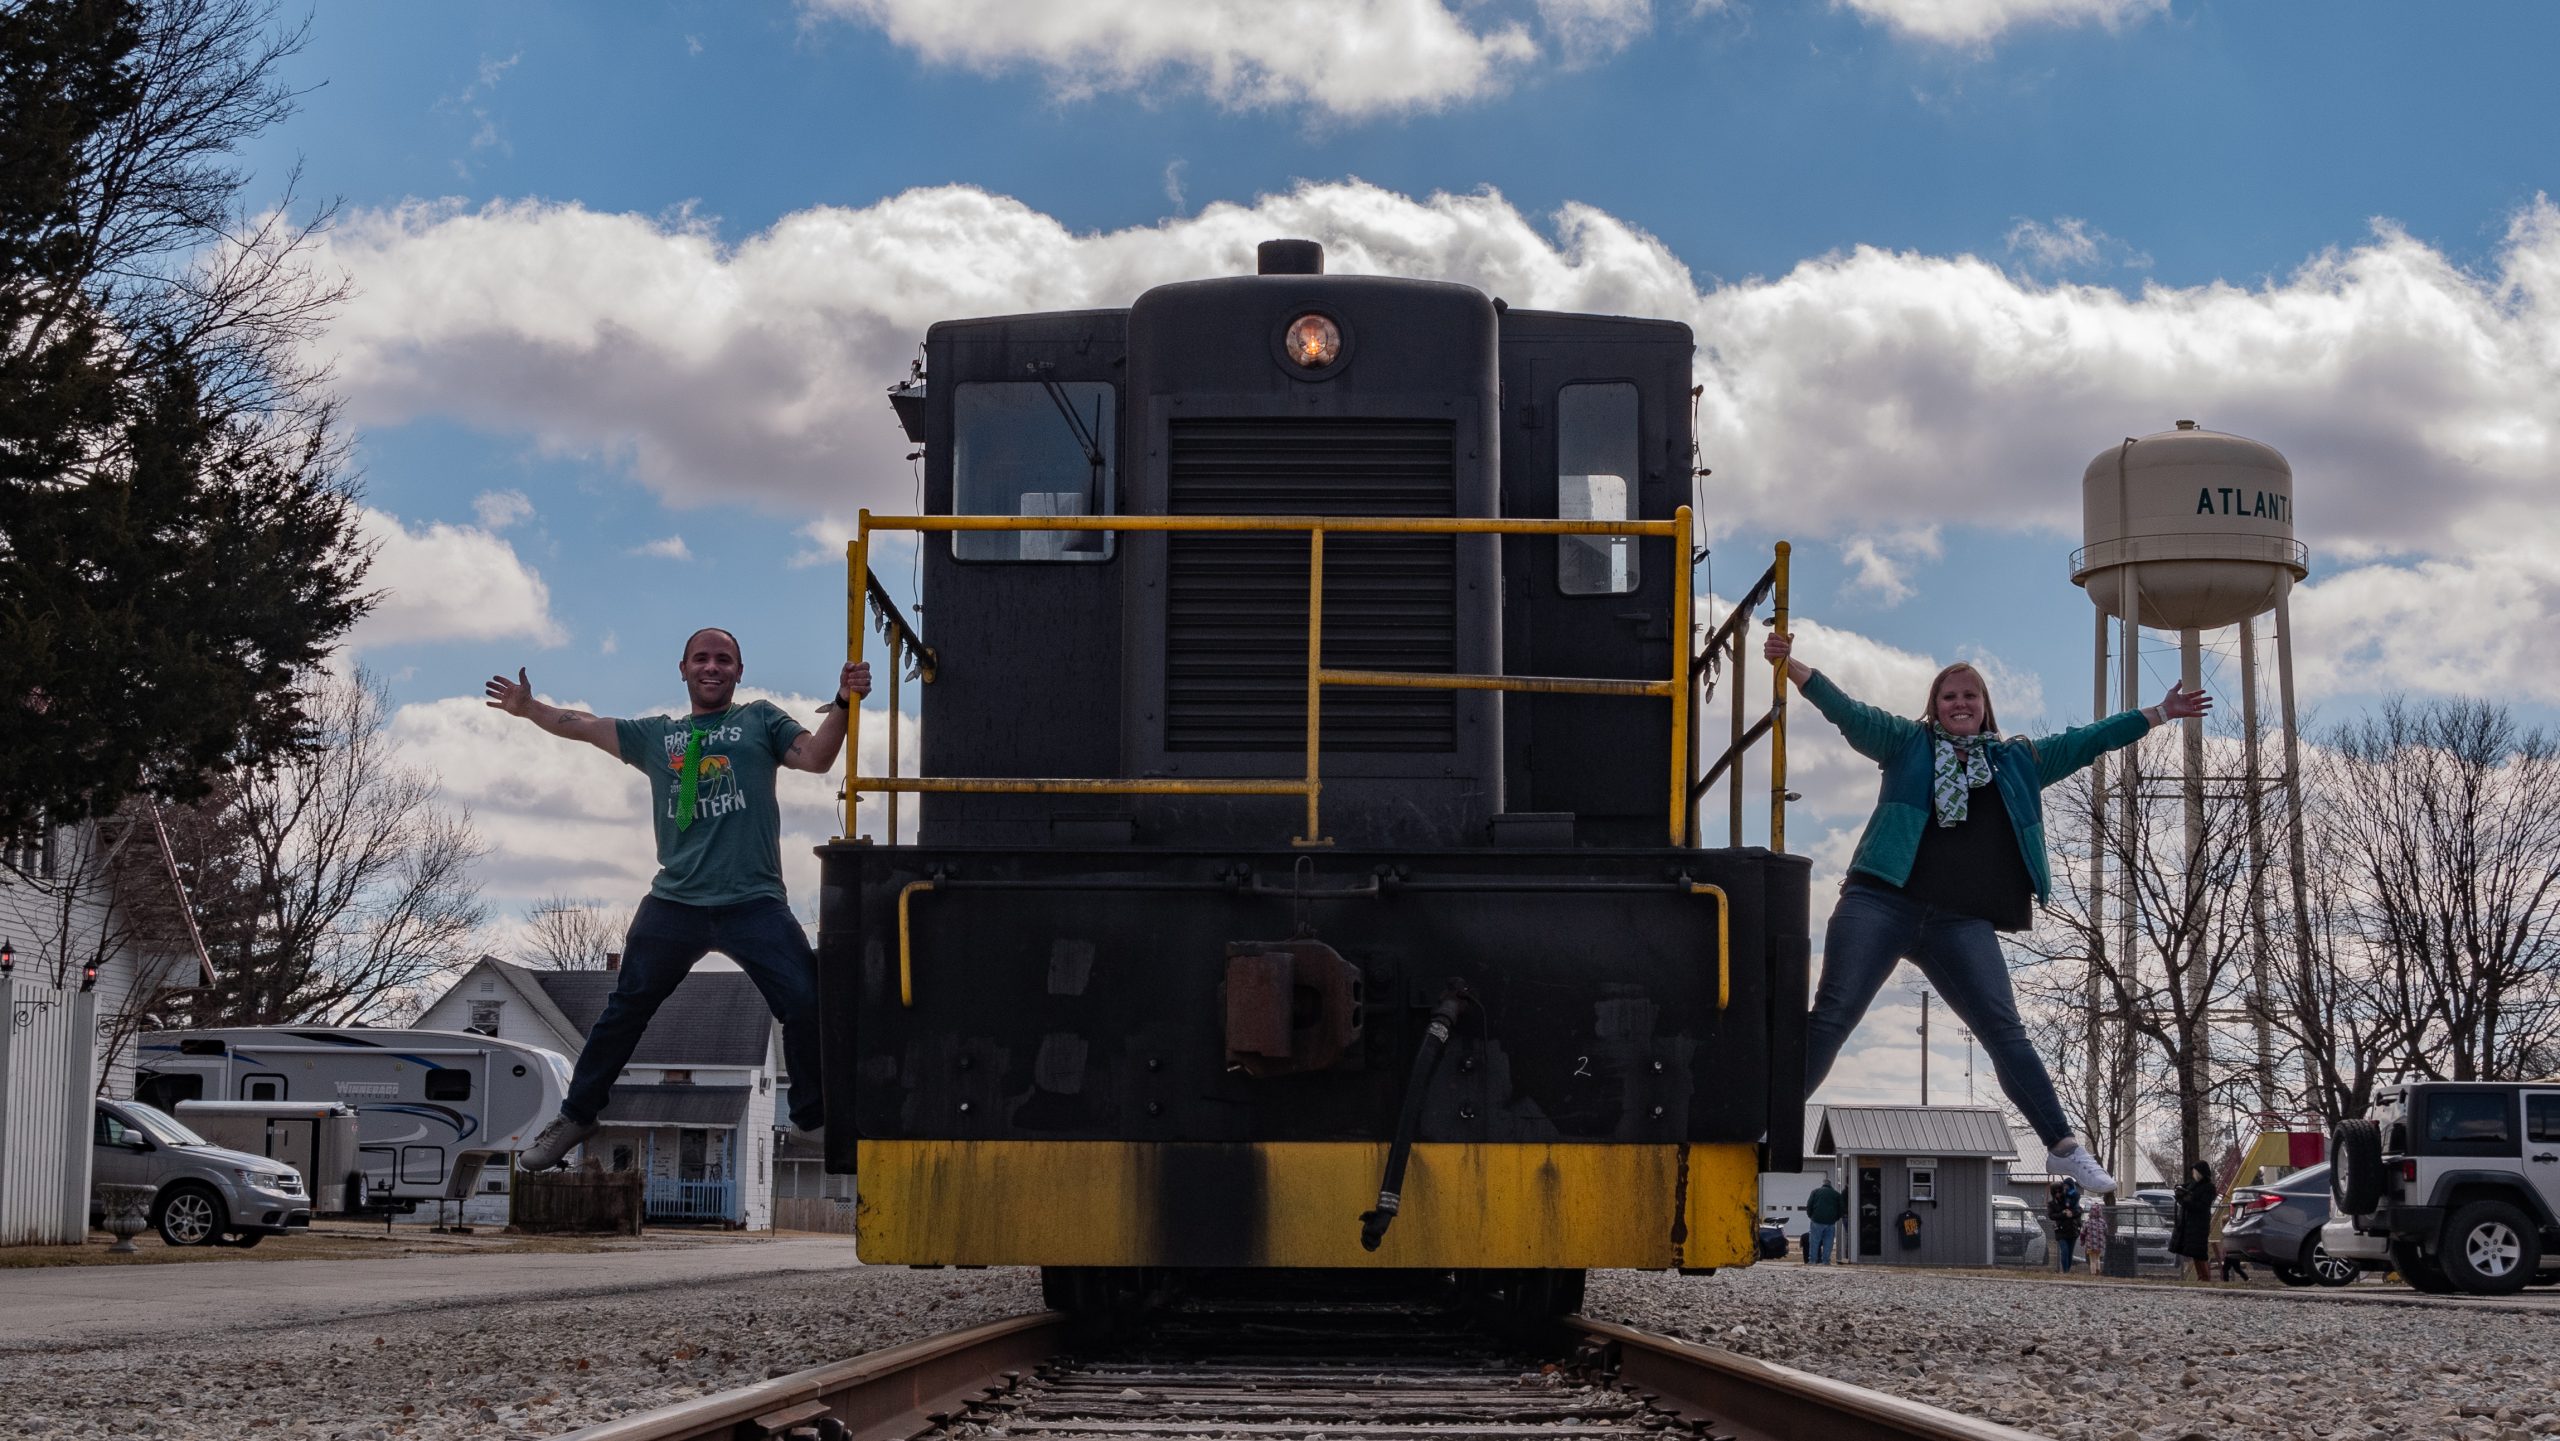 Our Indiana Train Excursion: St. Patrick’s Day Edition